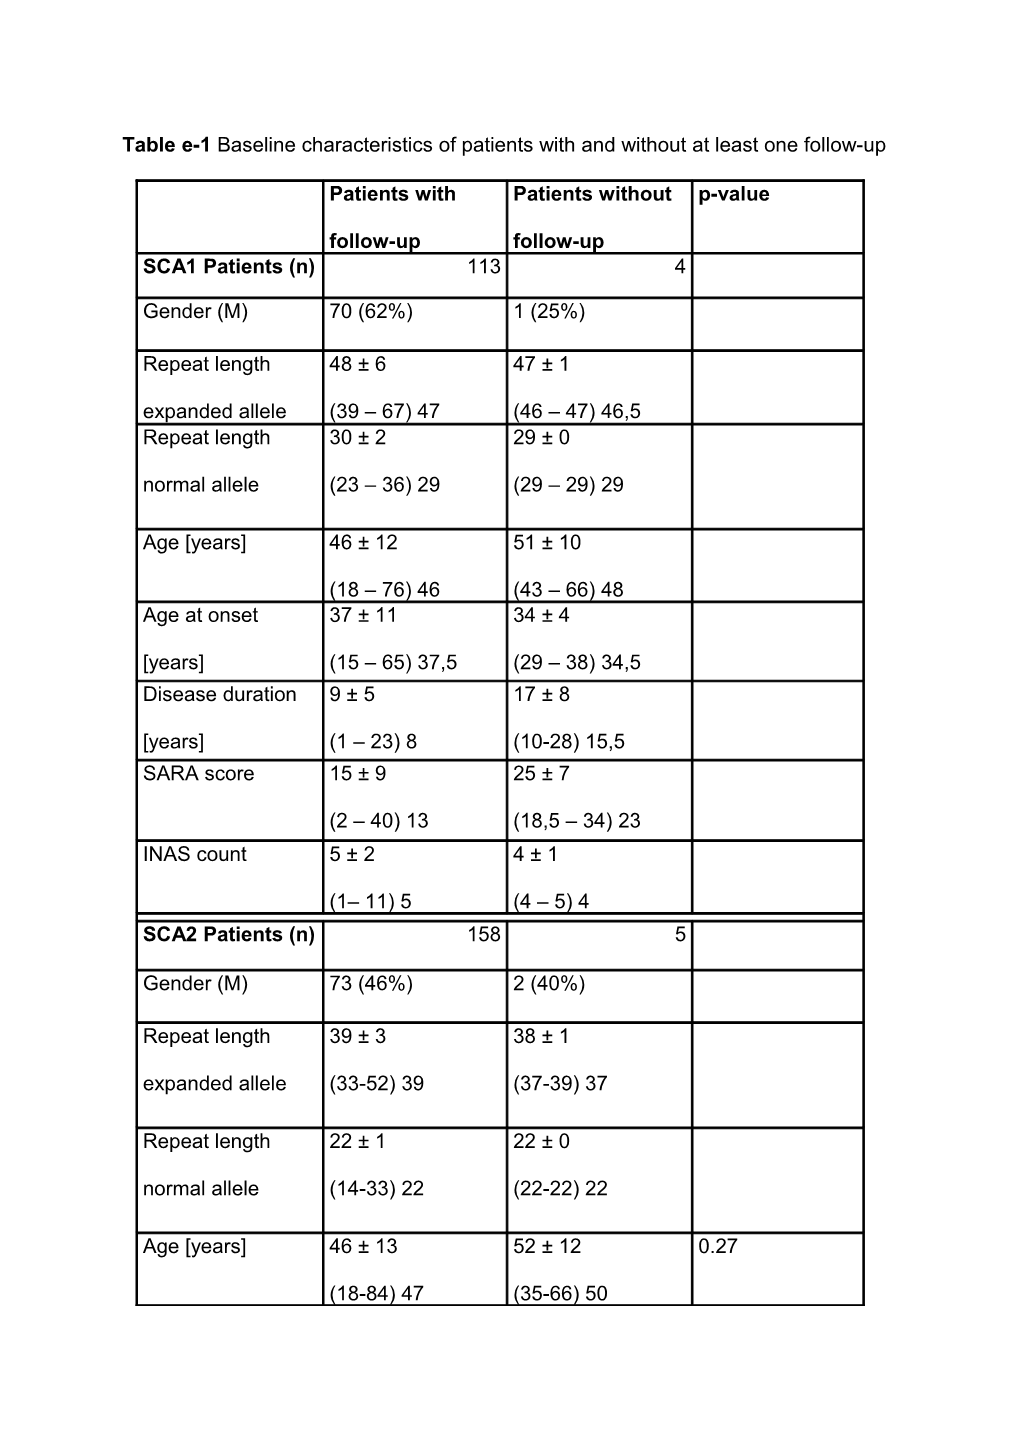 E-Table 1 Comparison of Baseline Characteristics of Patients with and Without at Least